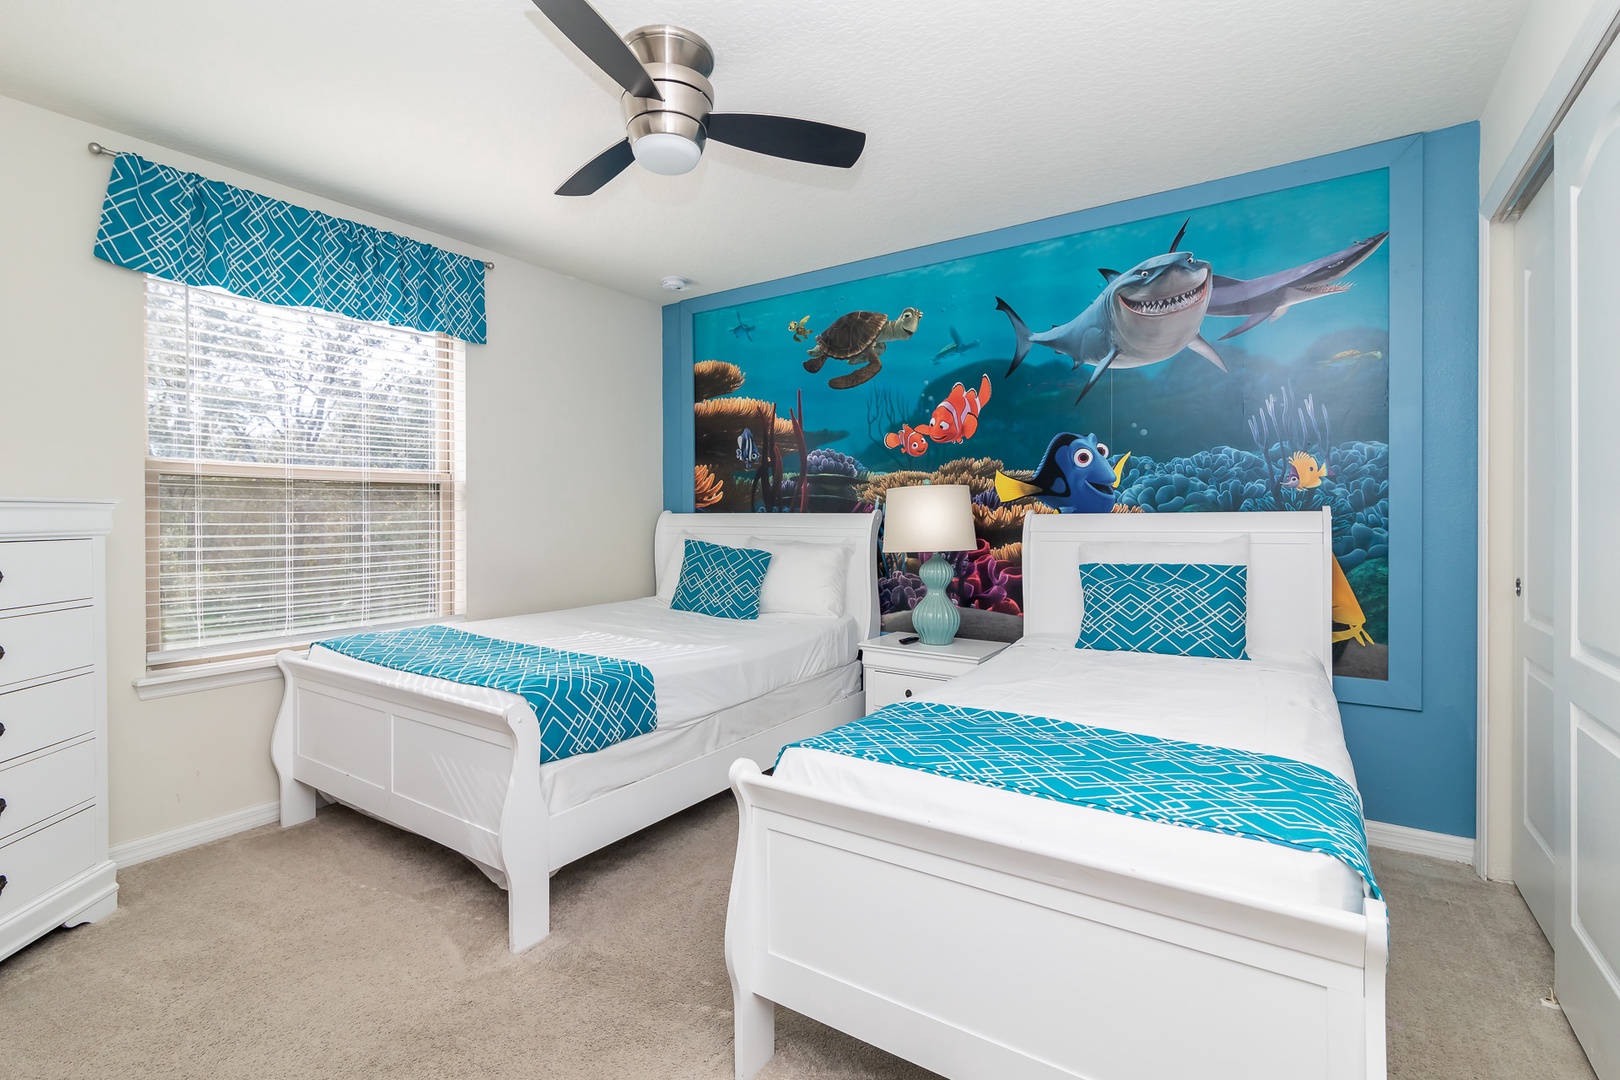 Bedroom #3 Finding Nemo themed with Twin Beds